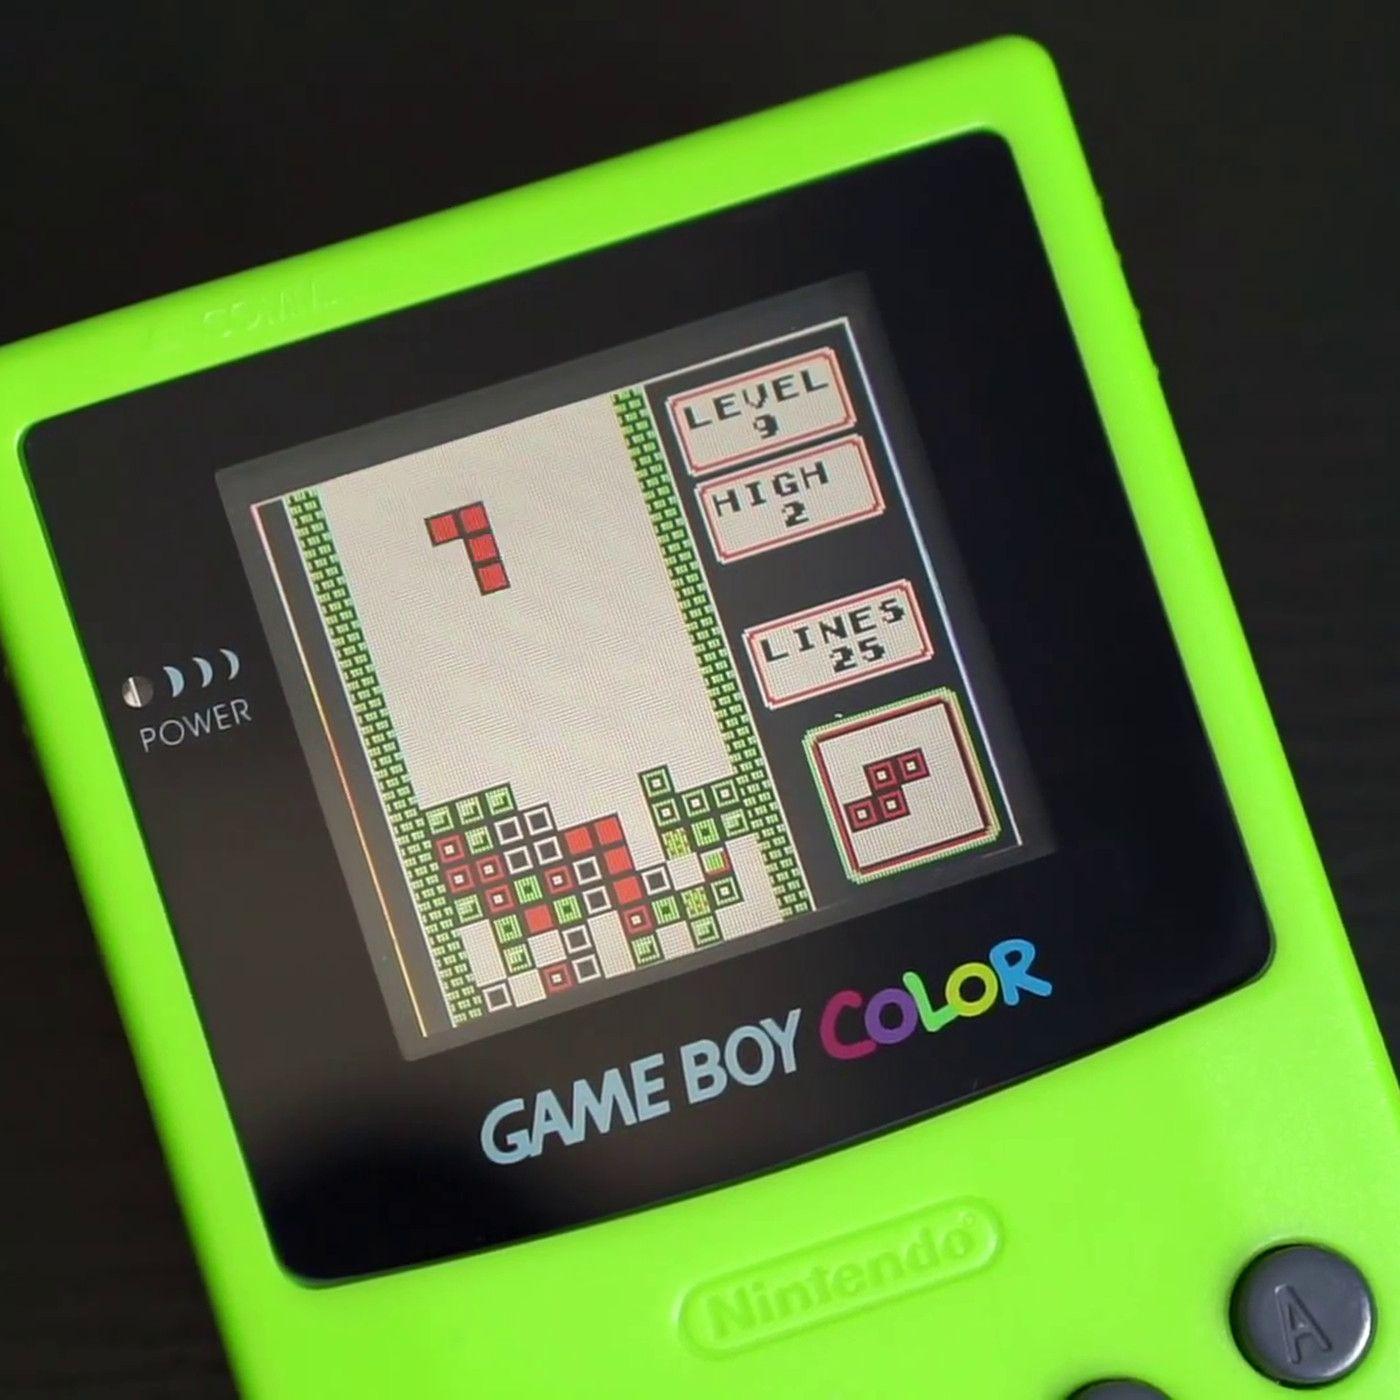 Game Boy Color finally modded with backlight, and it looks